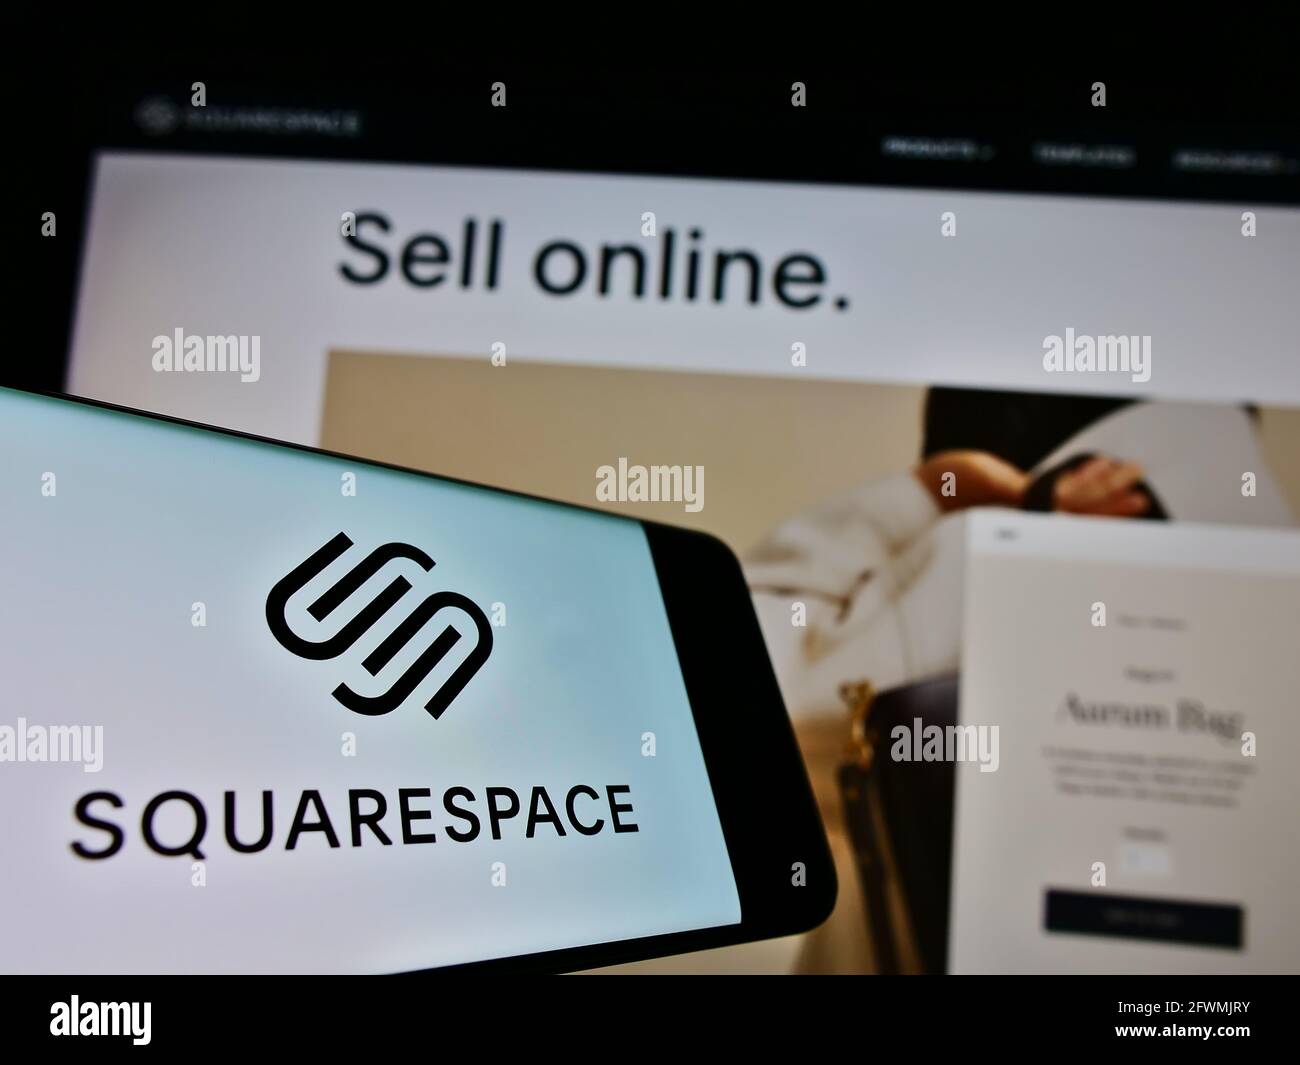 Smartphone with logo of American hosting platform company Squarespace Inc. on screen in front of website. Focus on center-right of phone display. Stock Photo